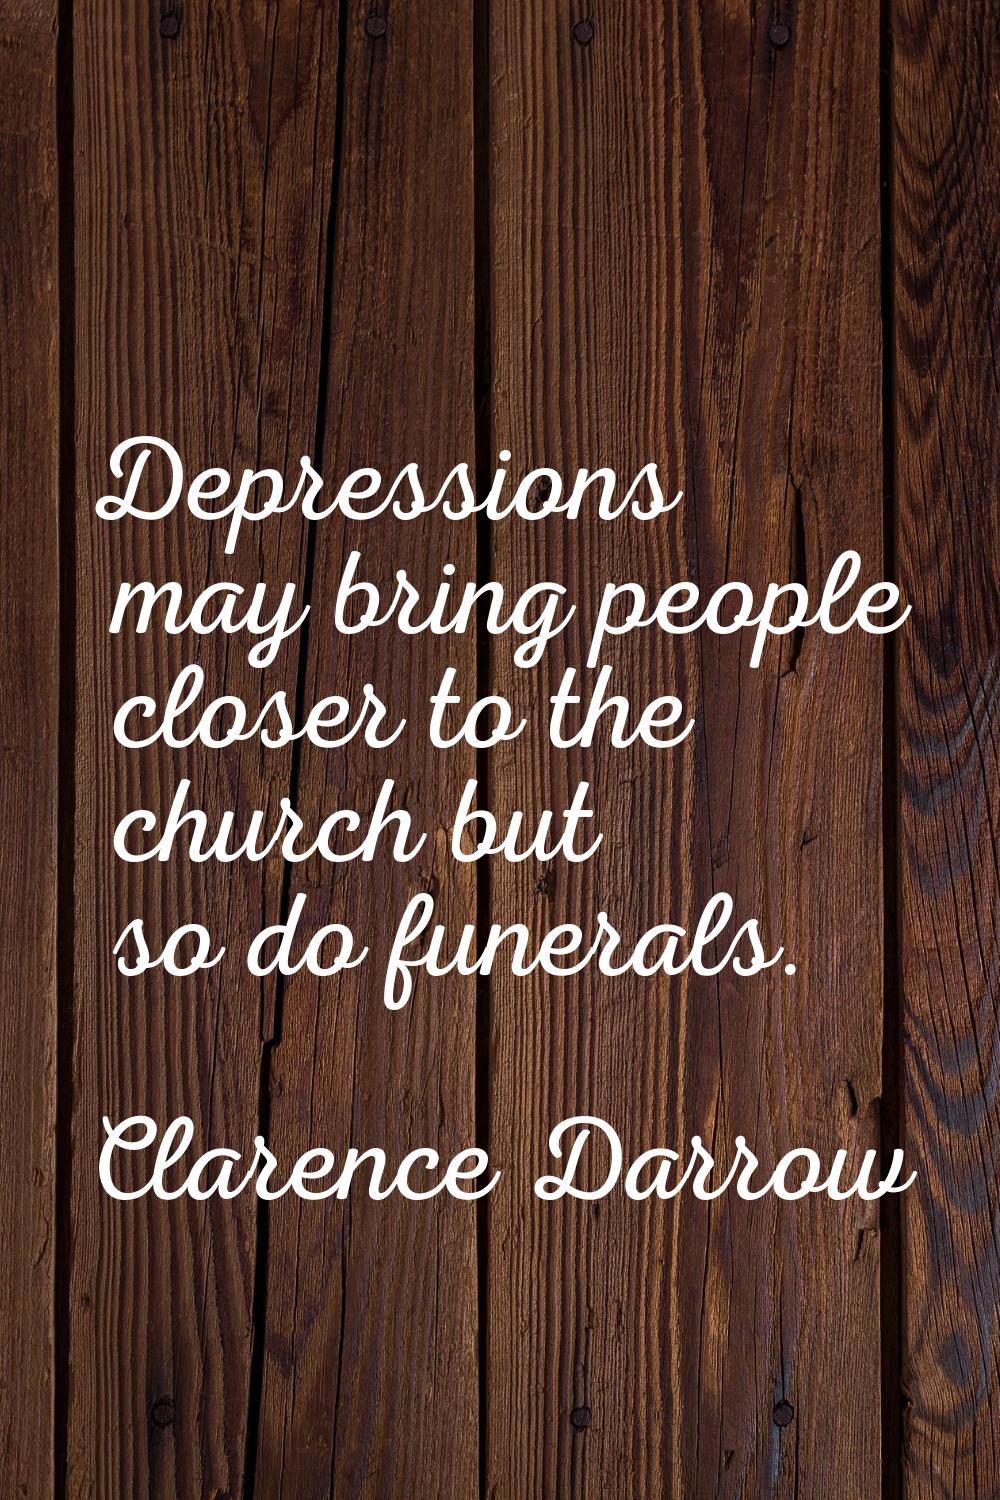 Depressions may bring people closer to the church but so do funerals.